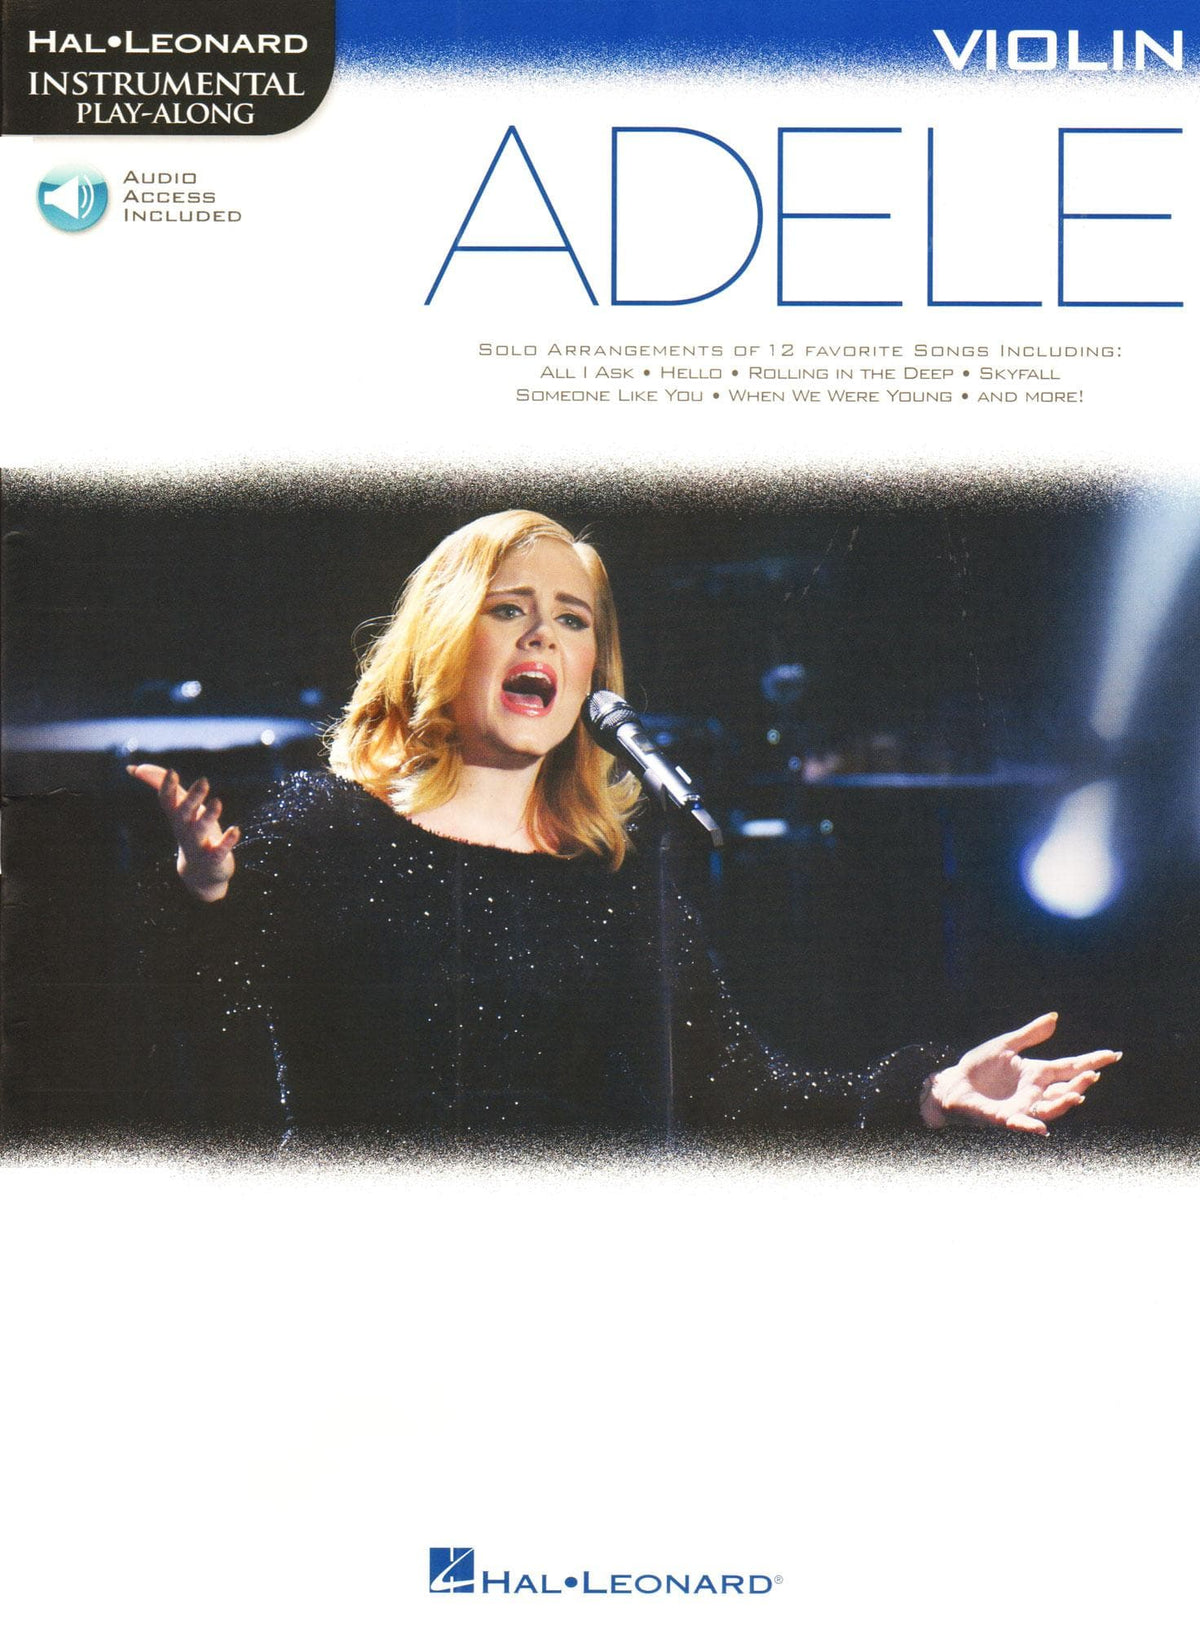 Adele - Instrumental Play-Along - for Violin with Audio Access Included - Hal Leonard